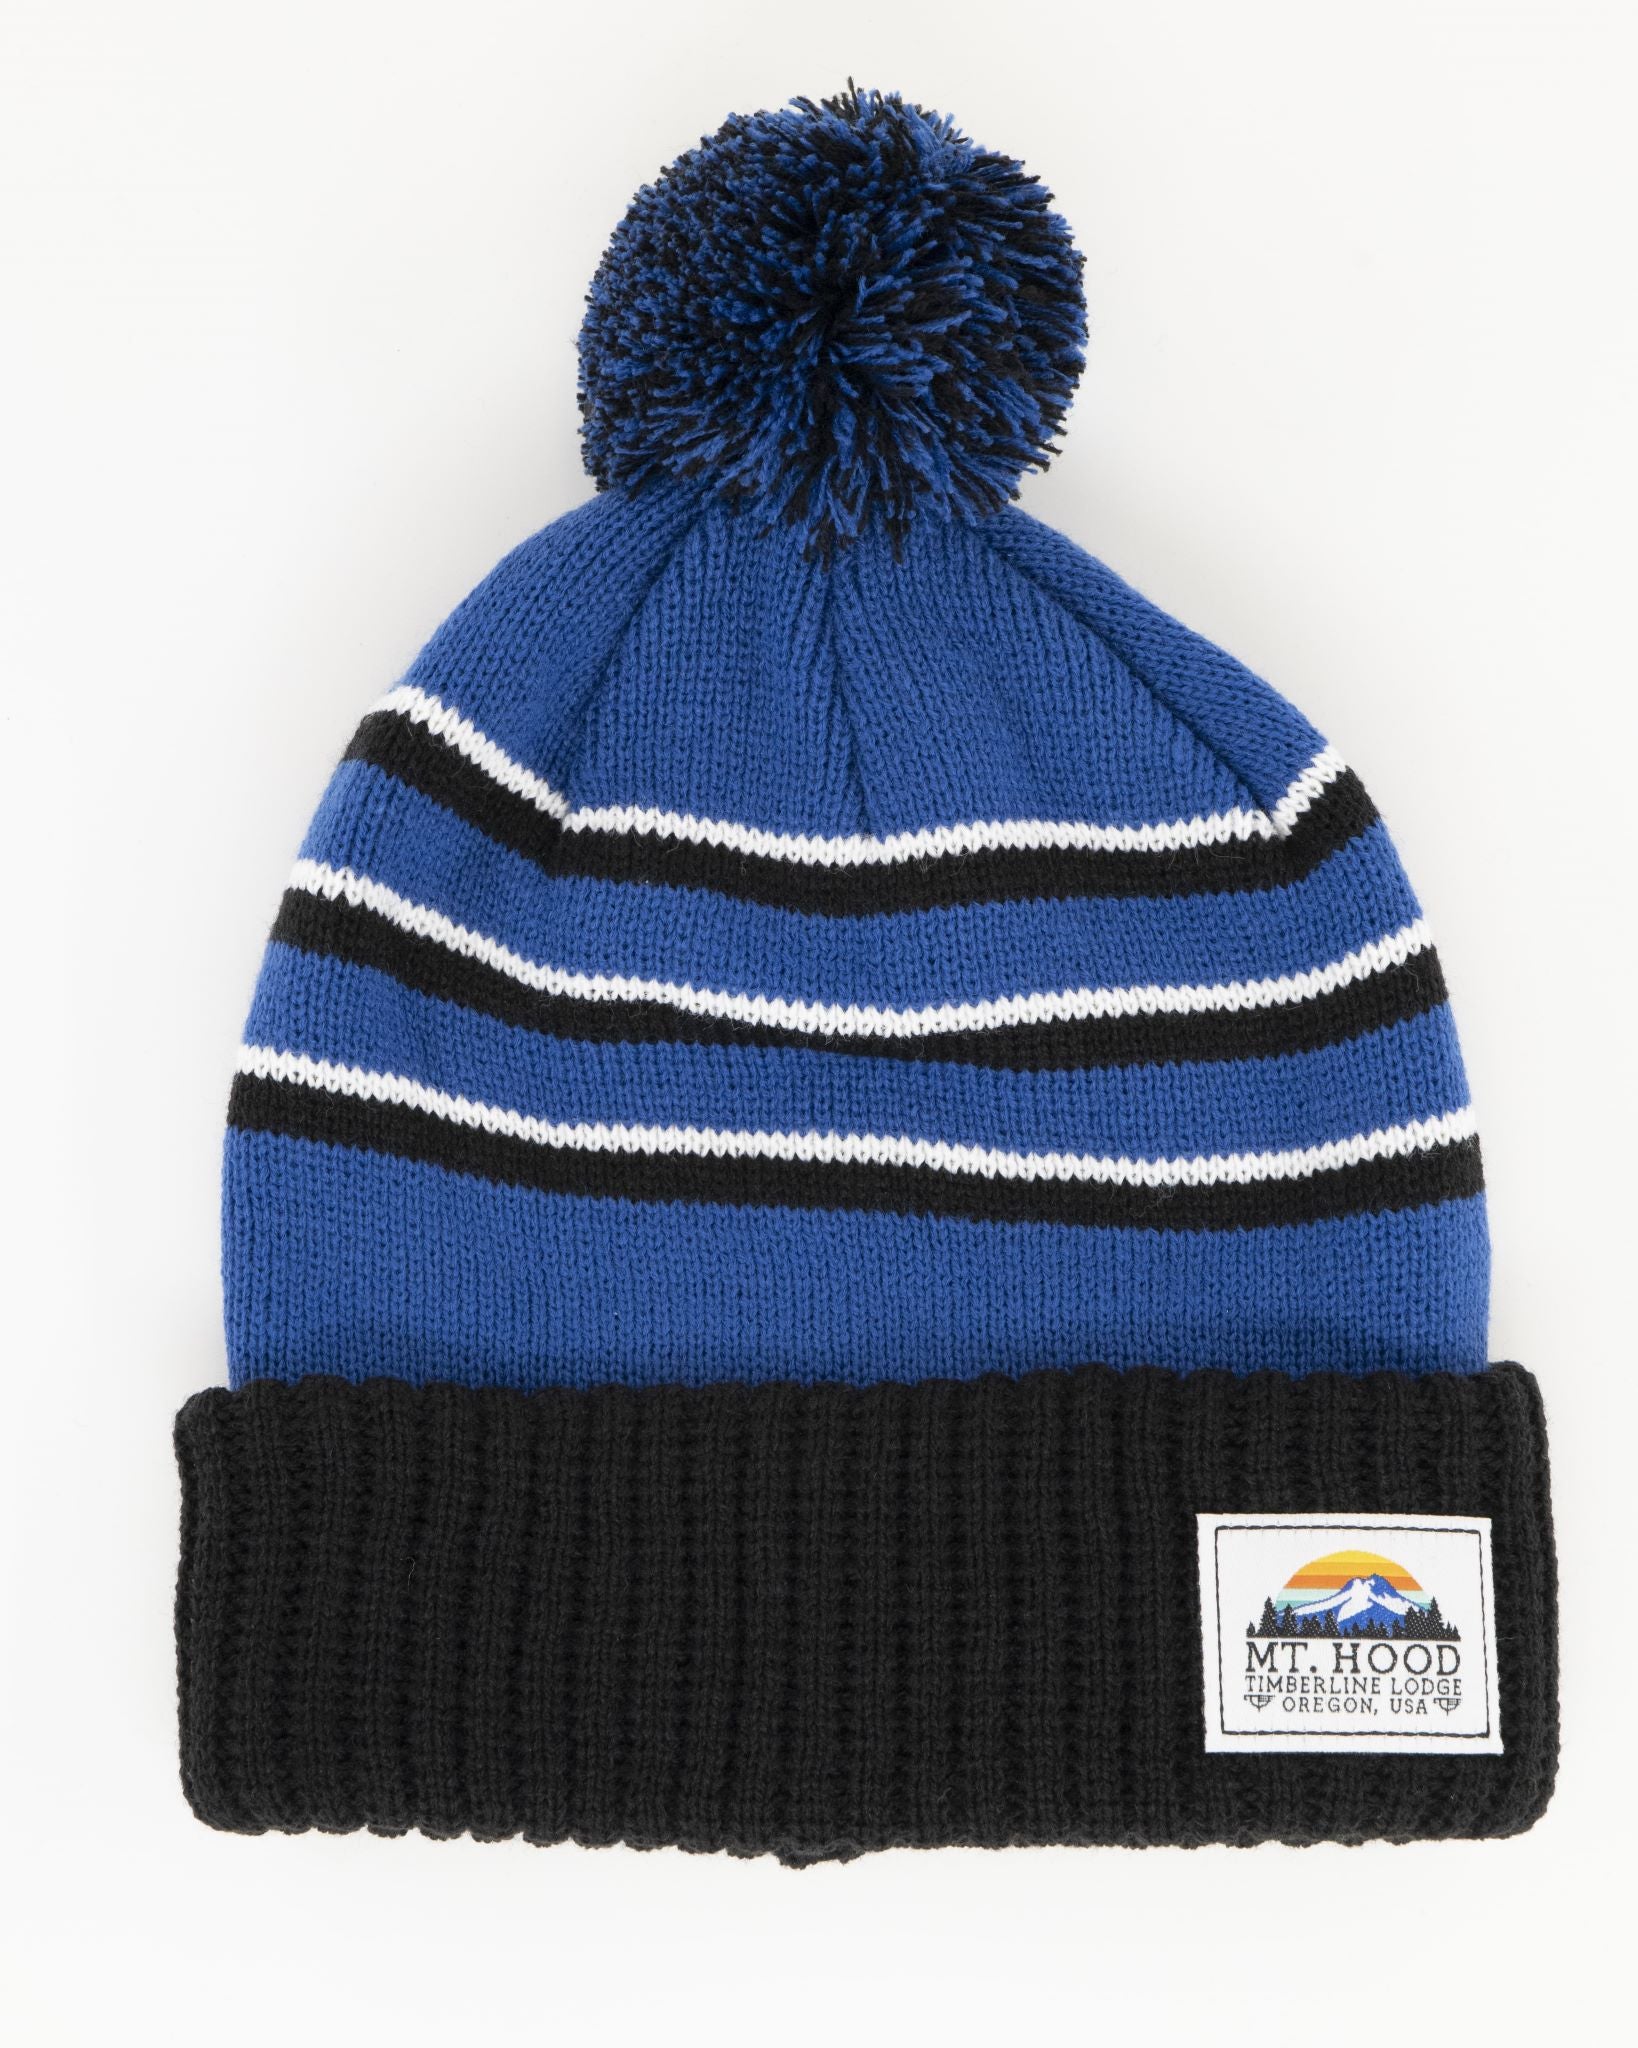 Pom Beanie - Daybreak - Available in Black, Grey, and White or Blue, B -  Timberline Lodge Online Store